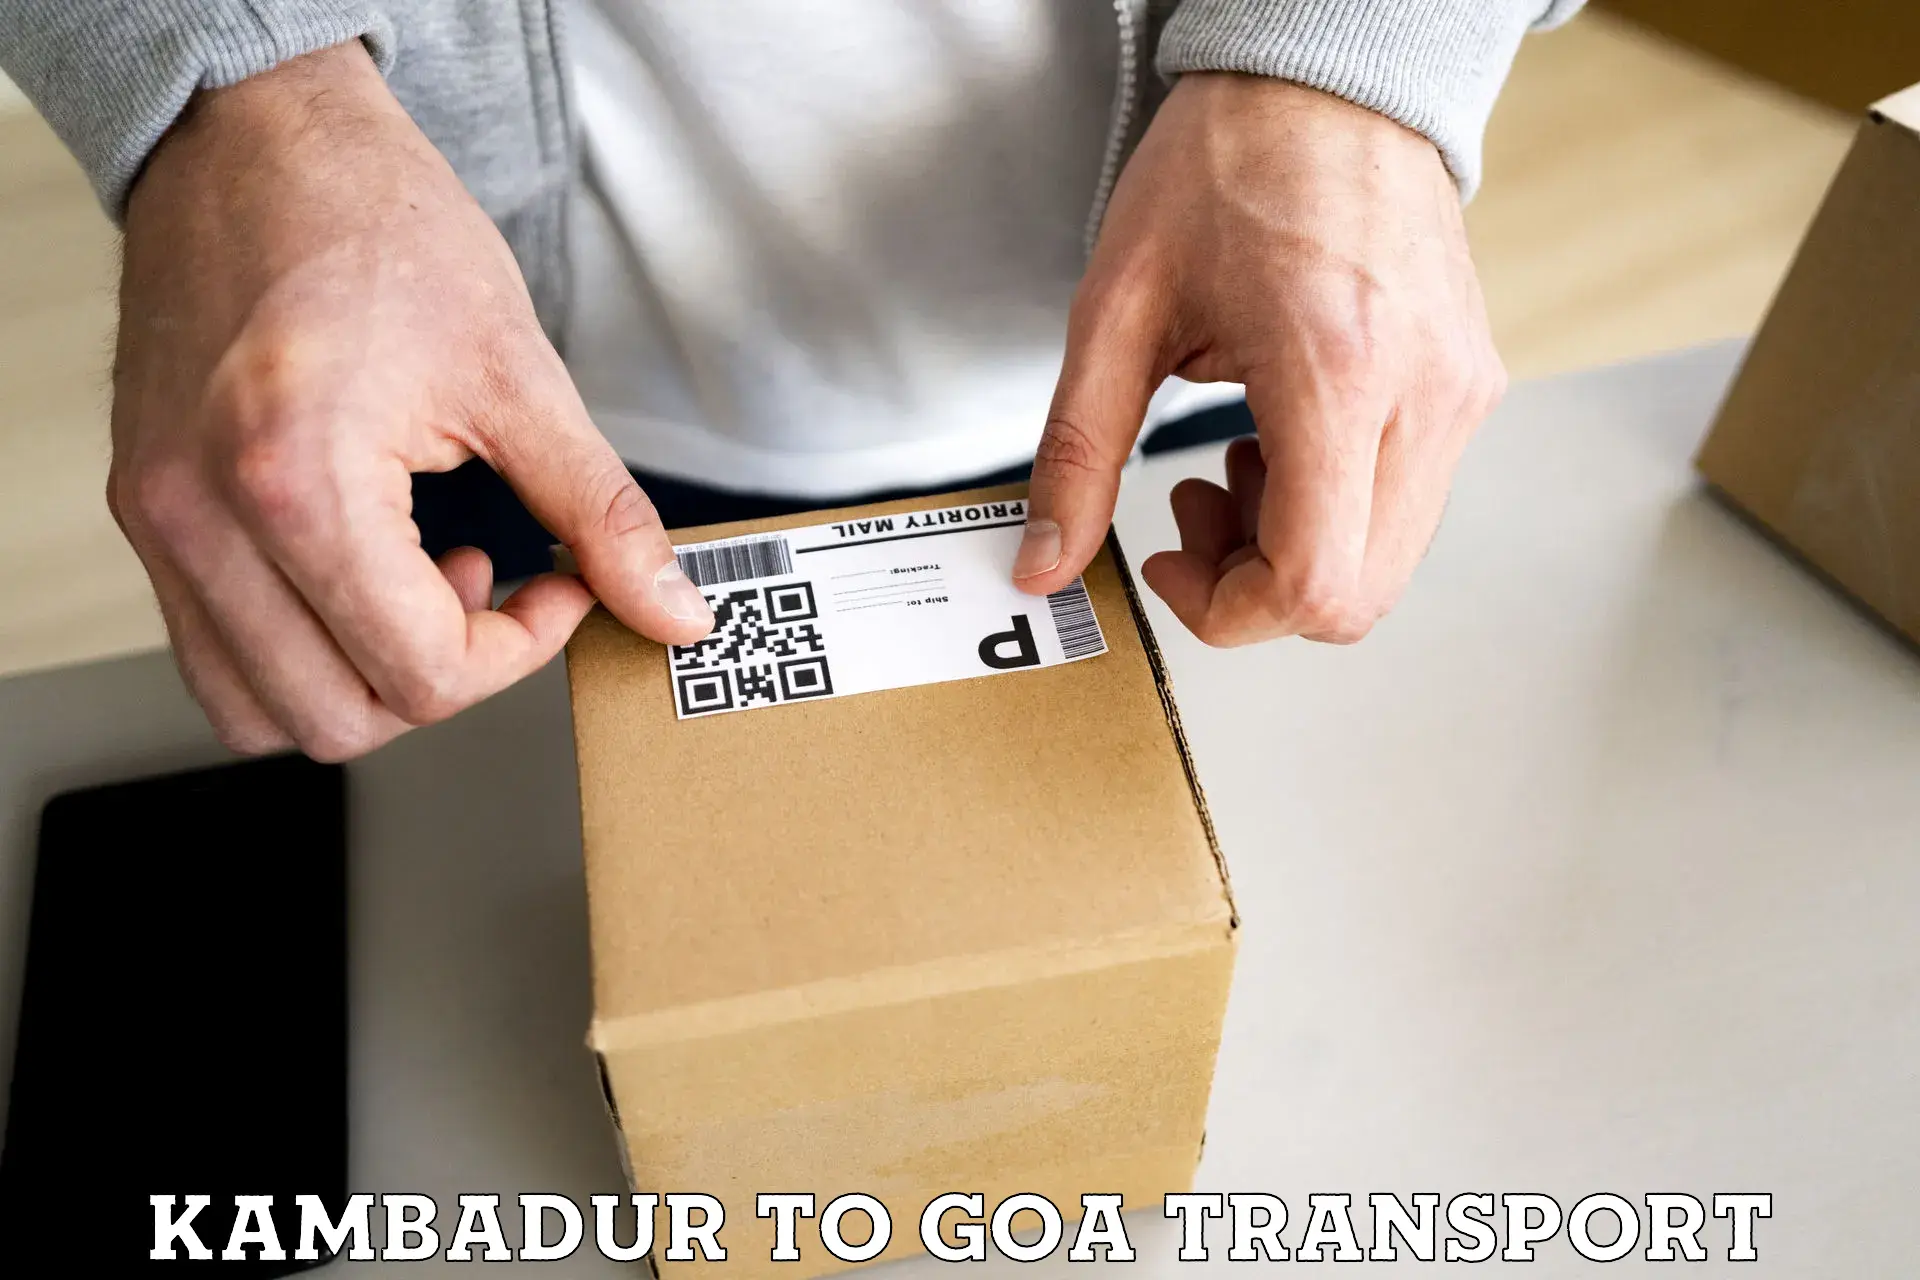 Transport bike from one state to another Kambadur to Goa University